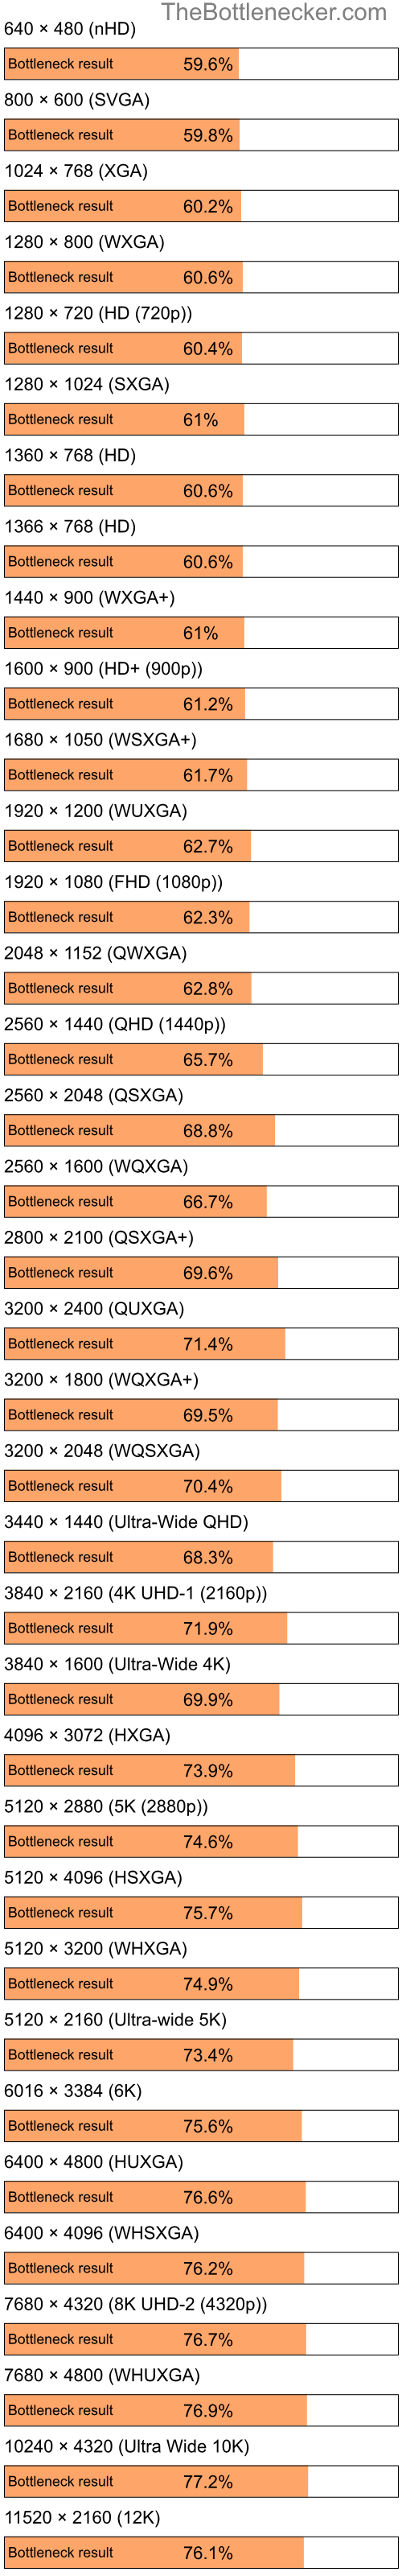 Bottleneck results by resolution for Intel Pentium 4 and NVIDIA GeForce Go 7400 in Processor Intense Tasks